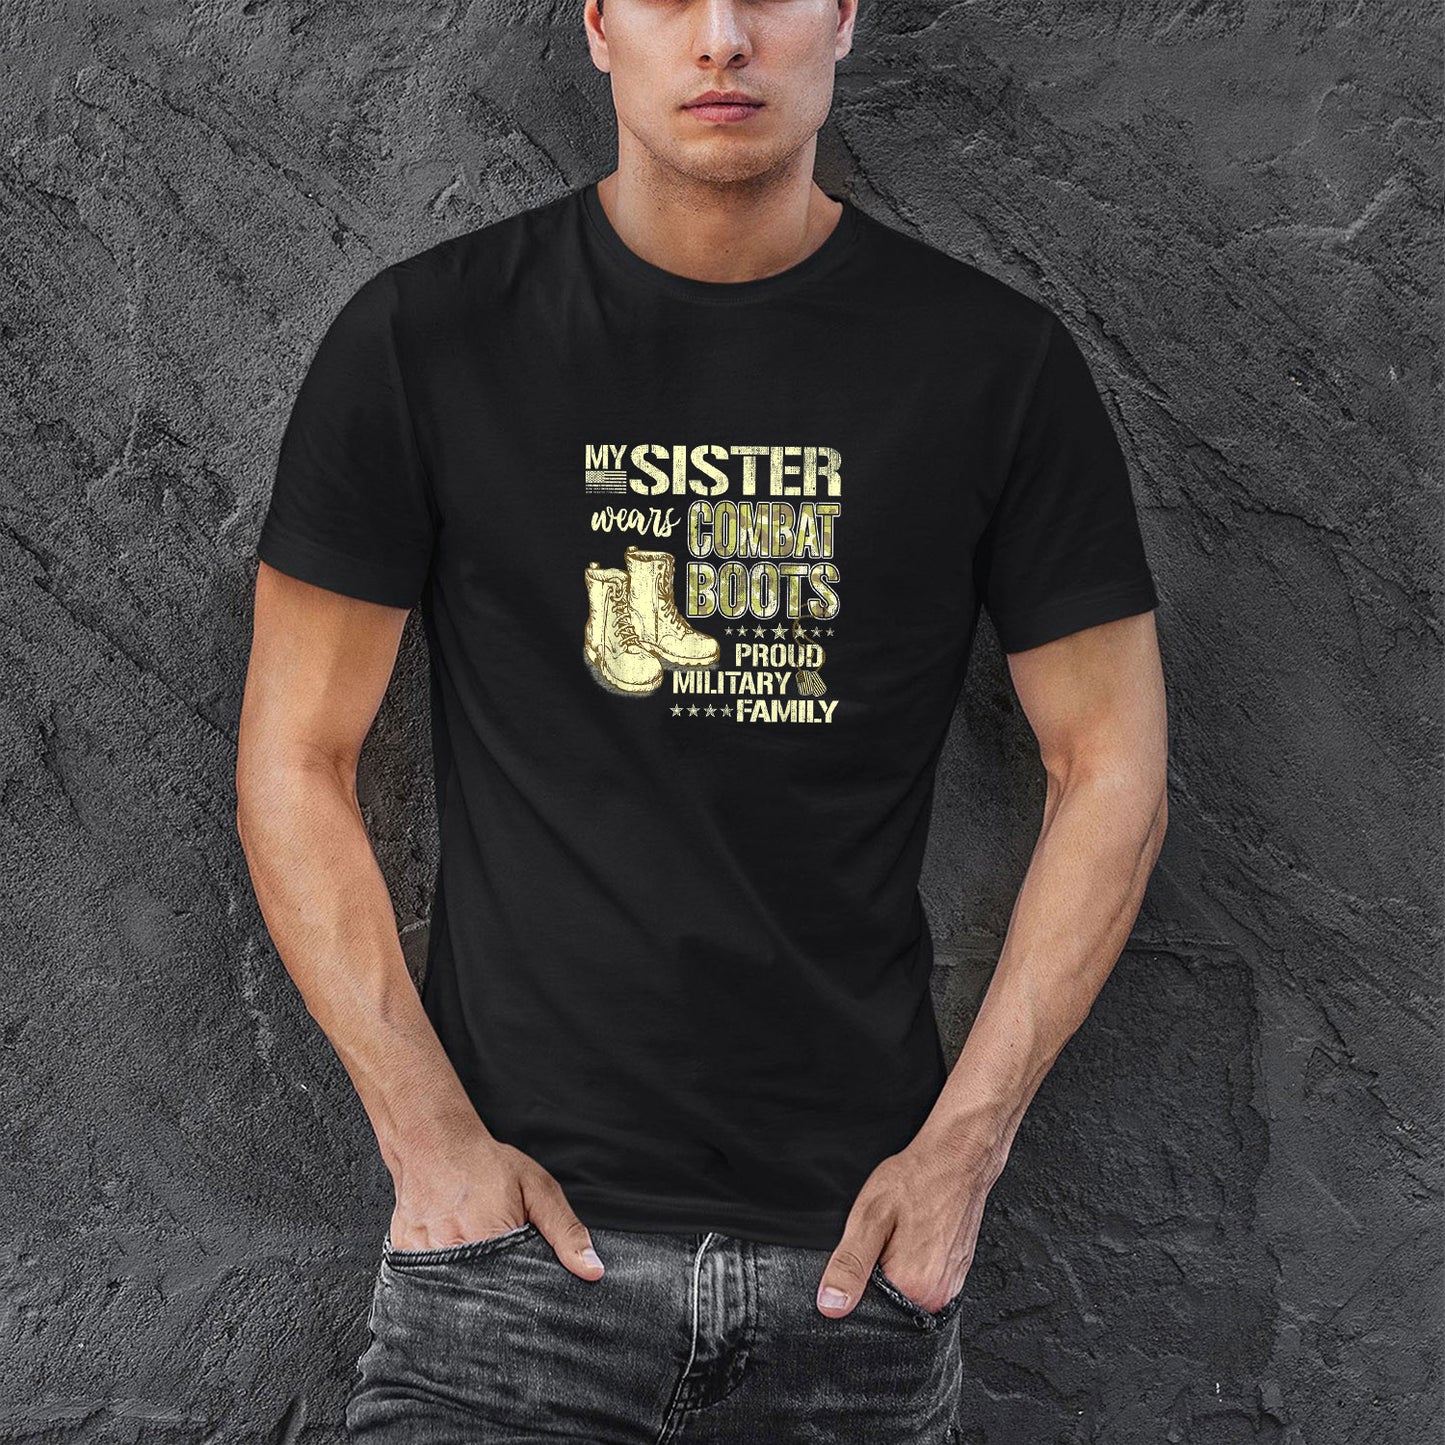 Memorial Day 2021 Proud Sister Of A Us Marine Shirt, My Sister Wears Combat Boots  Proud Military Family Gift Shirt For Men, Cotton Shirt, Air Force Memorial Shirt, Usaf T Shirt